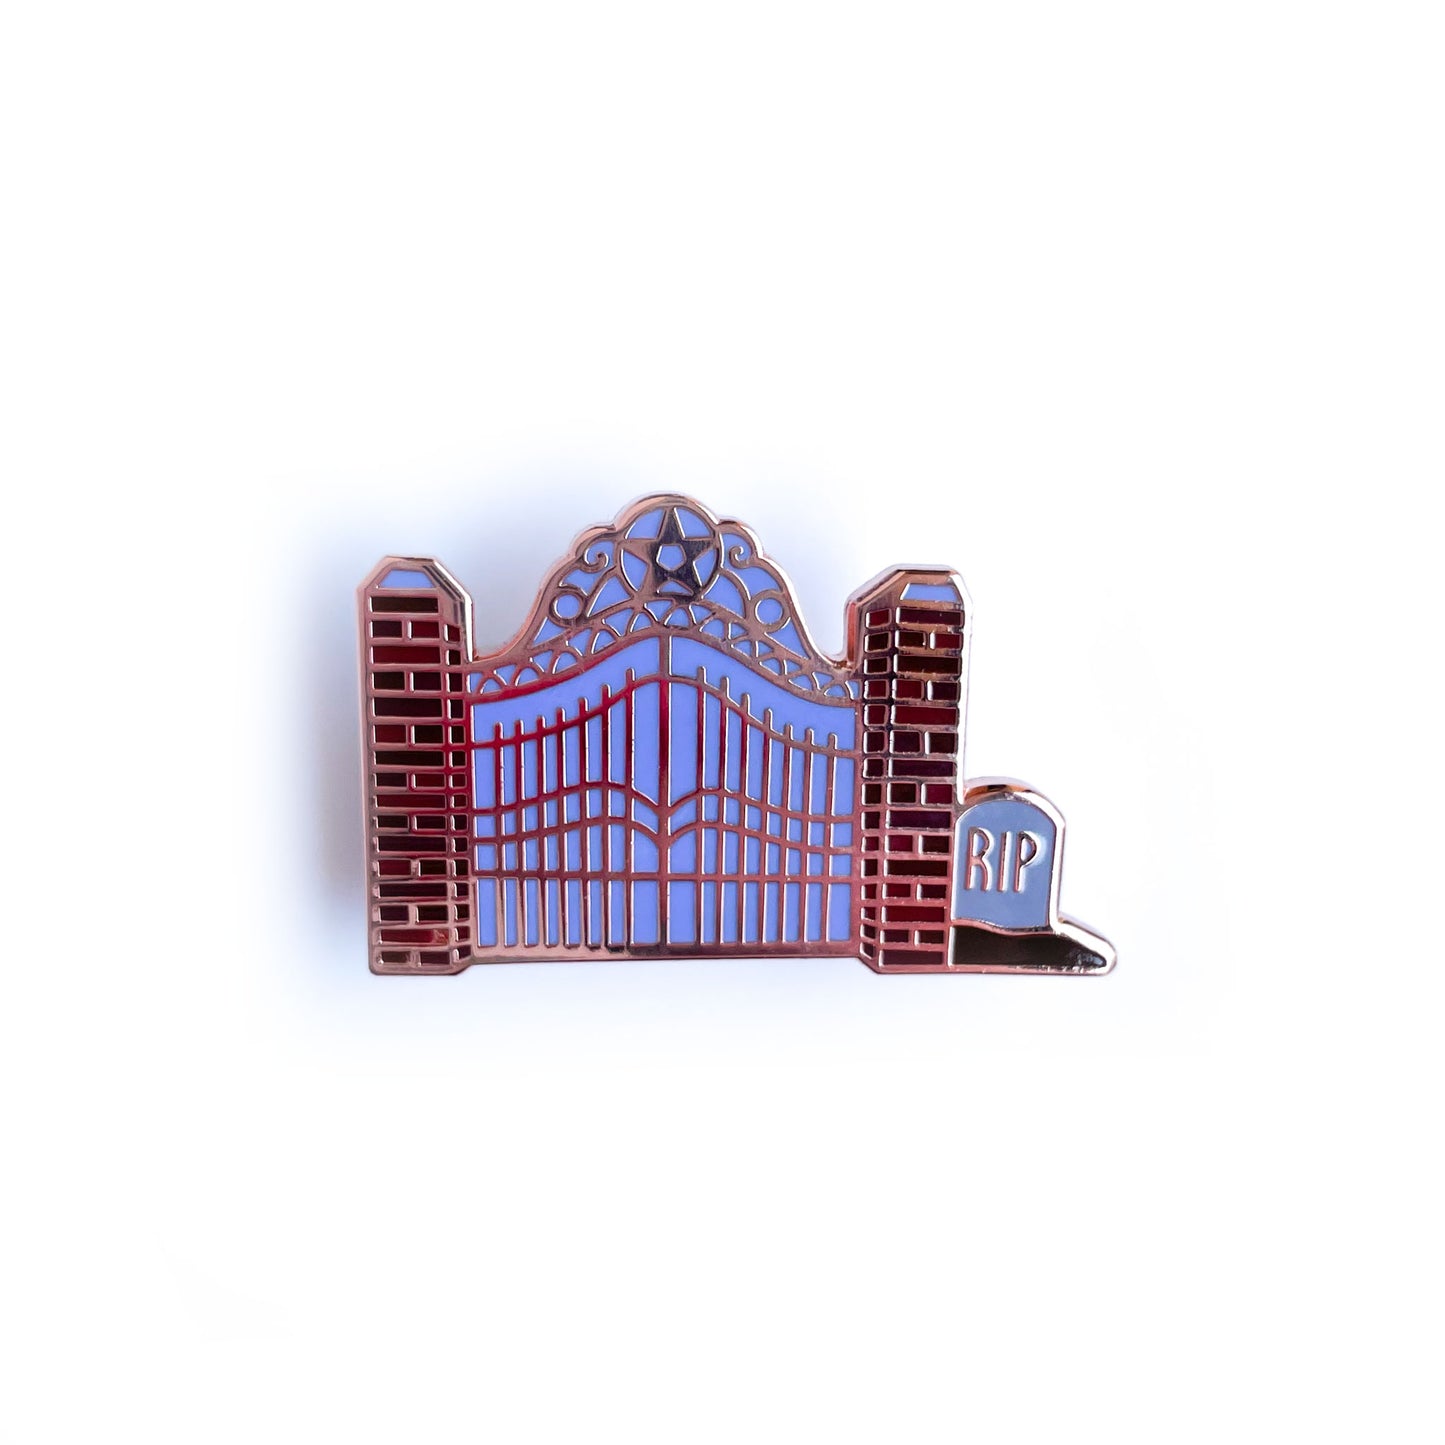 An enamel pin shaped like a cemetery gate with brick pillars and a tombstone that reads "RIP" 